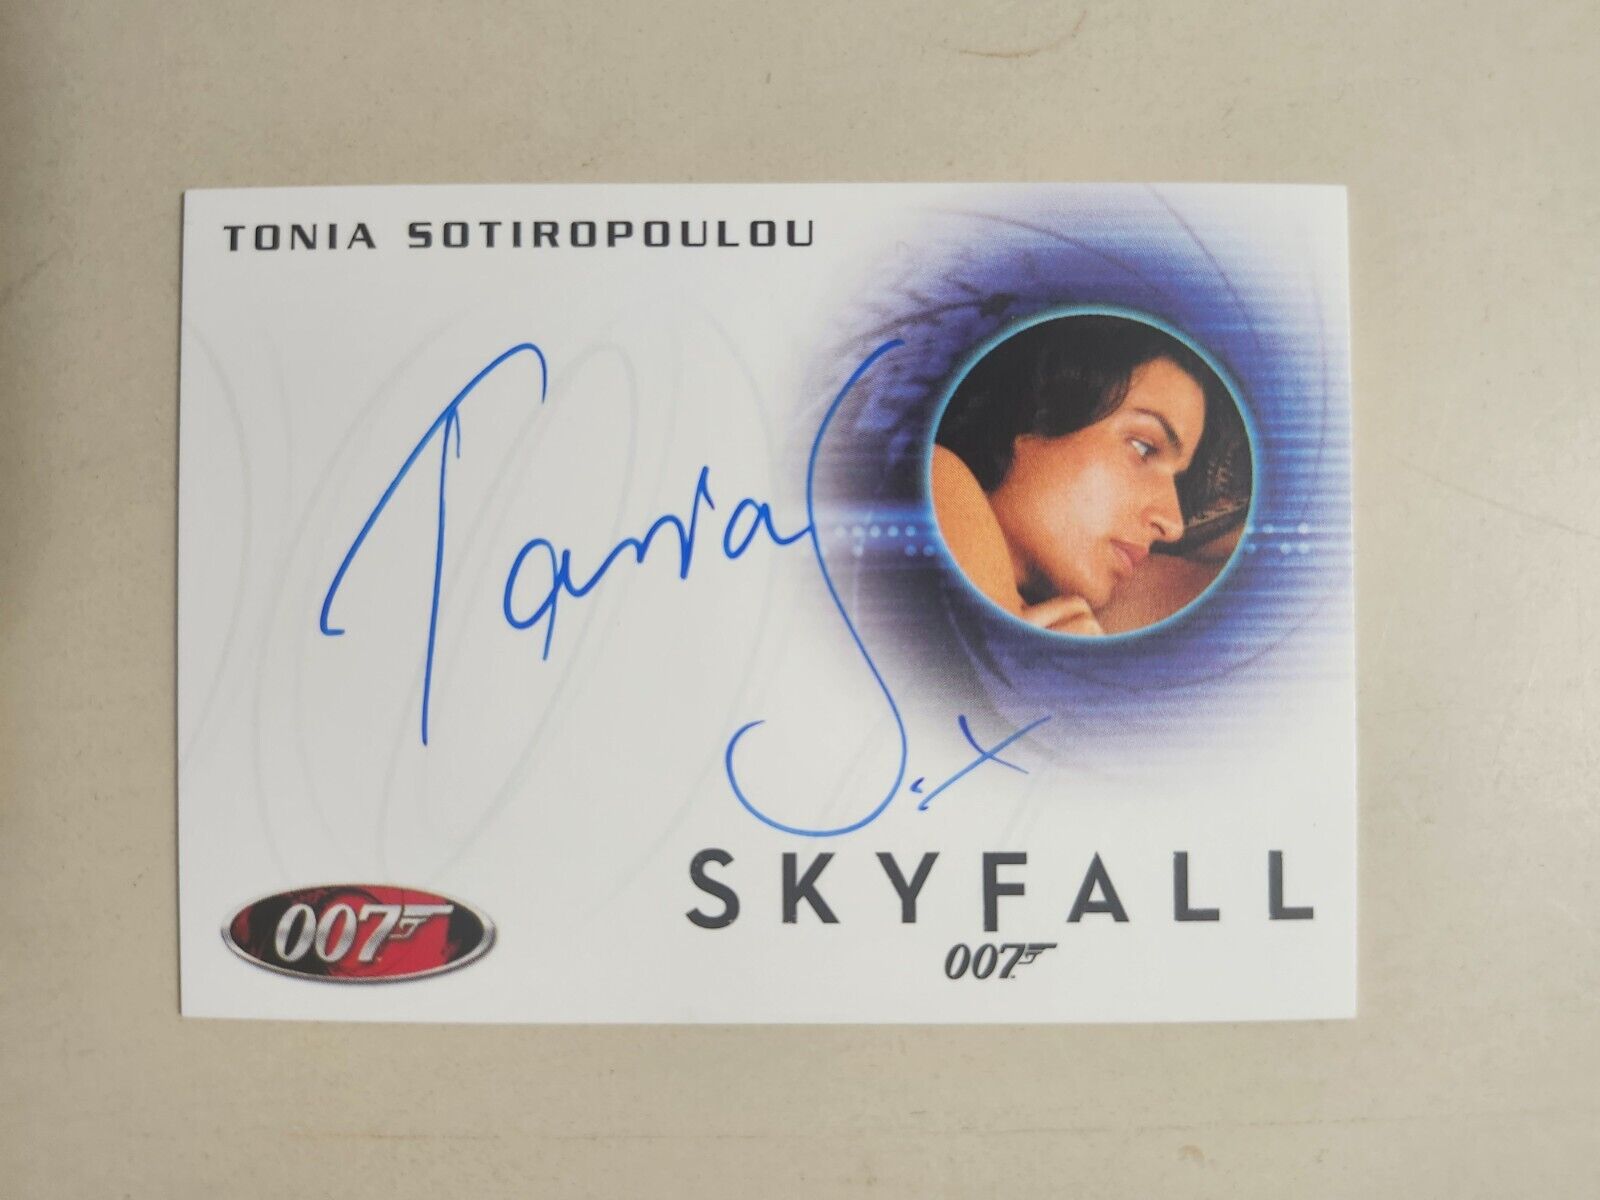 James Bond 007 Signed Autographed Tonia Sotiropoulou Lover Skyfall A240 COOL